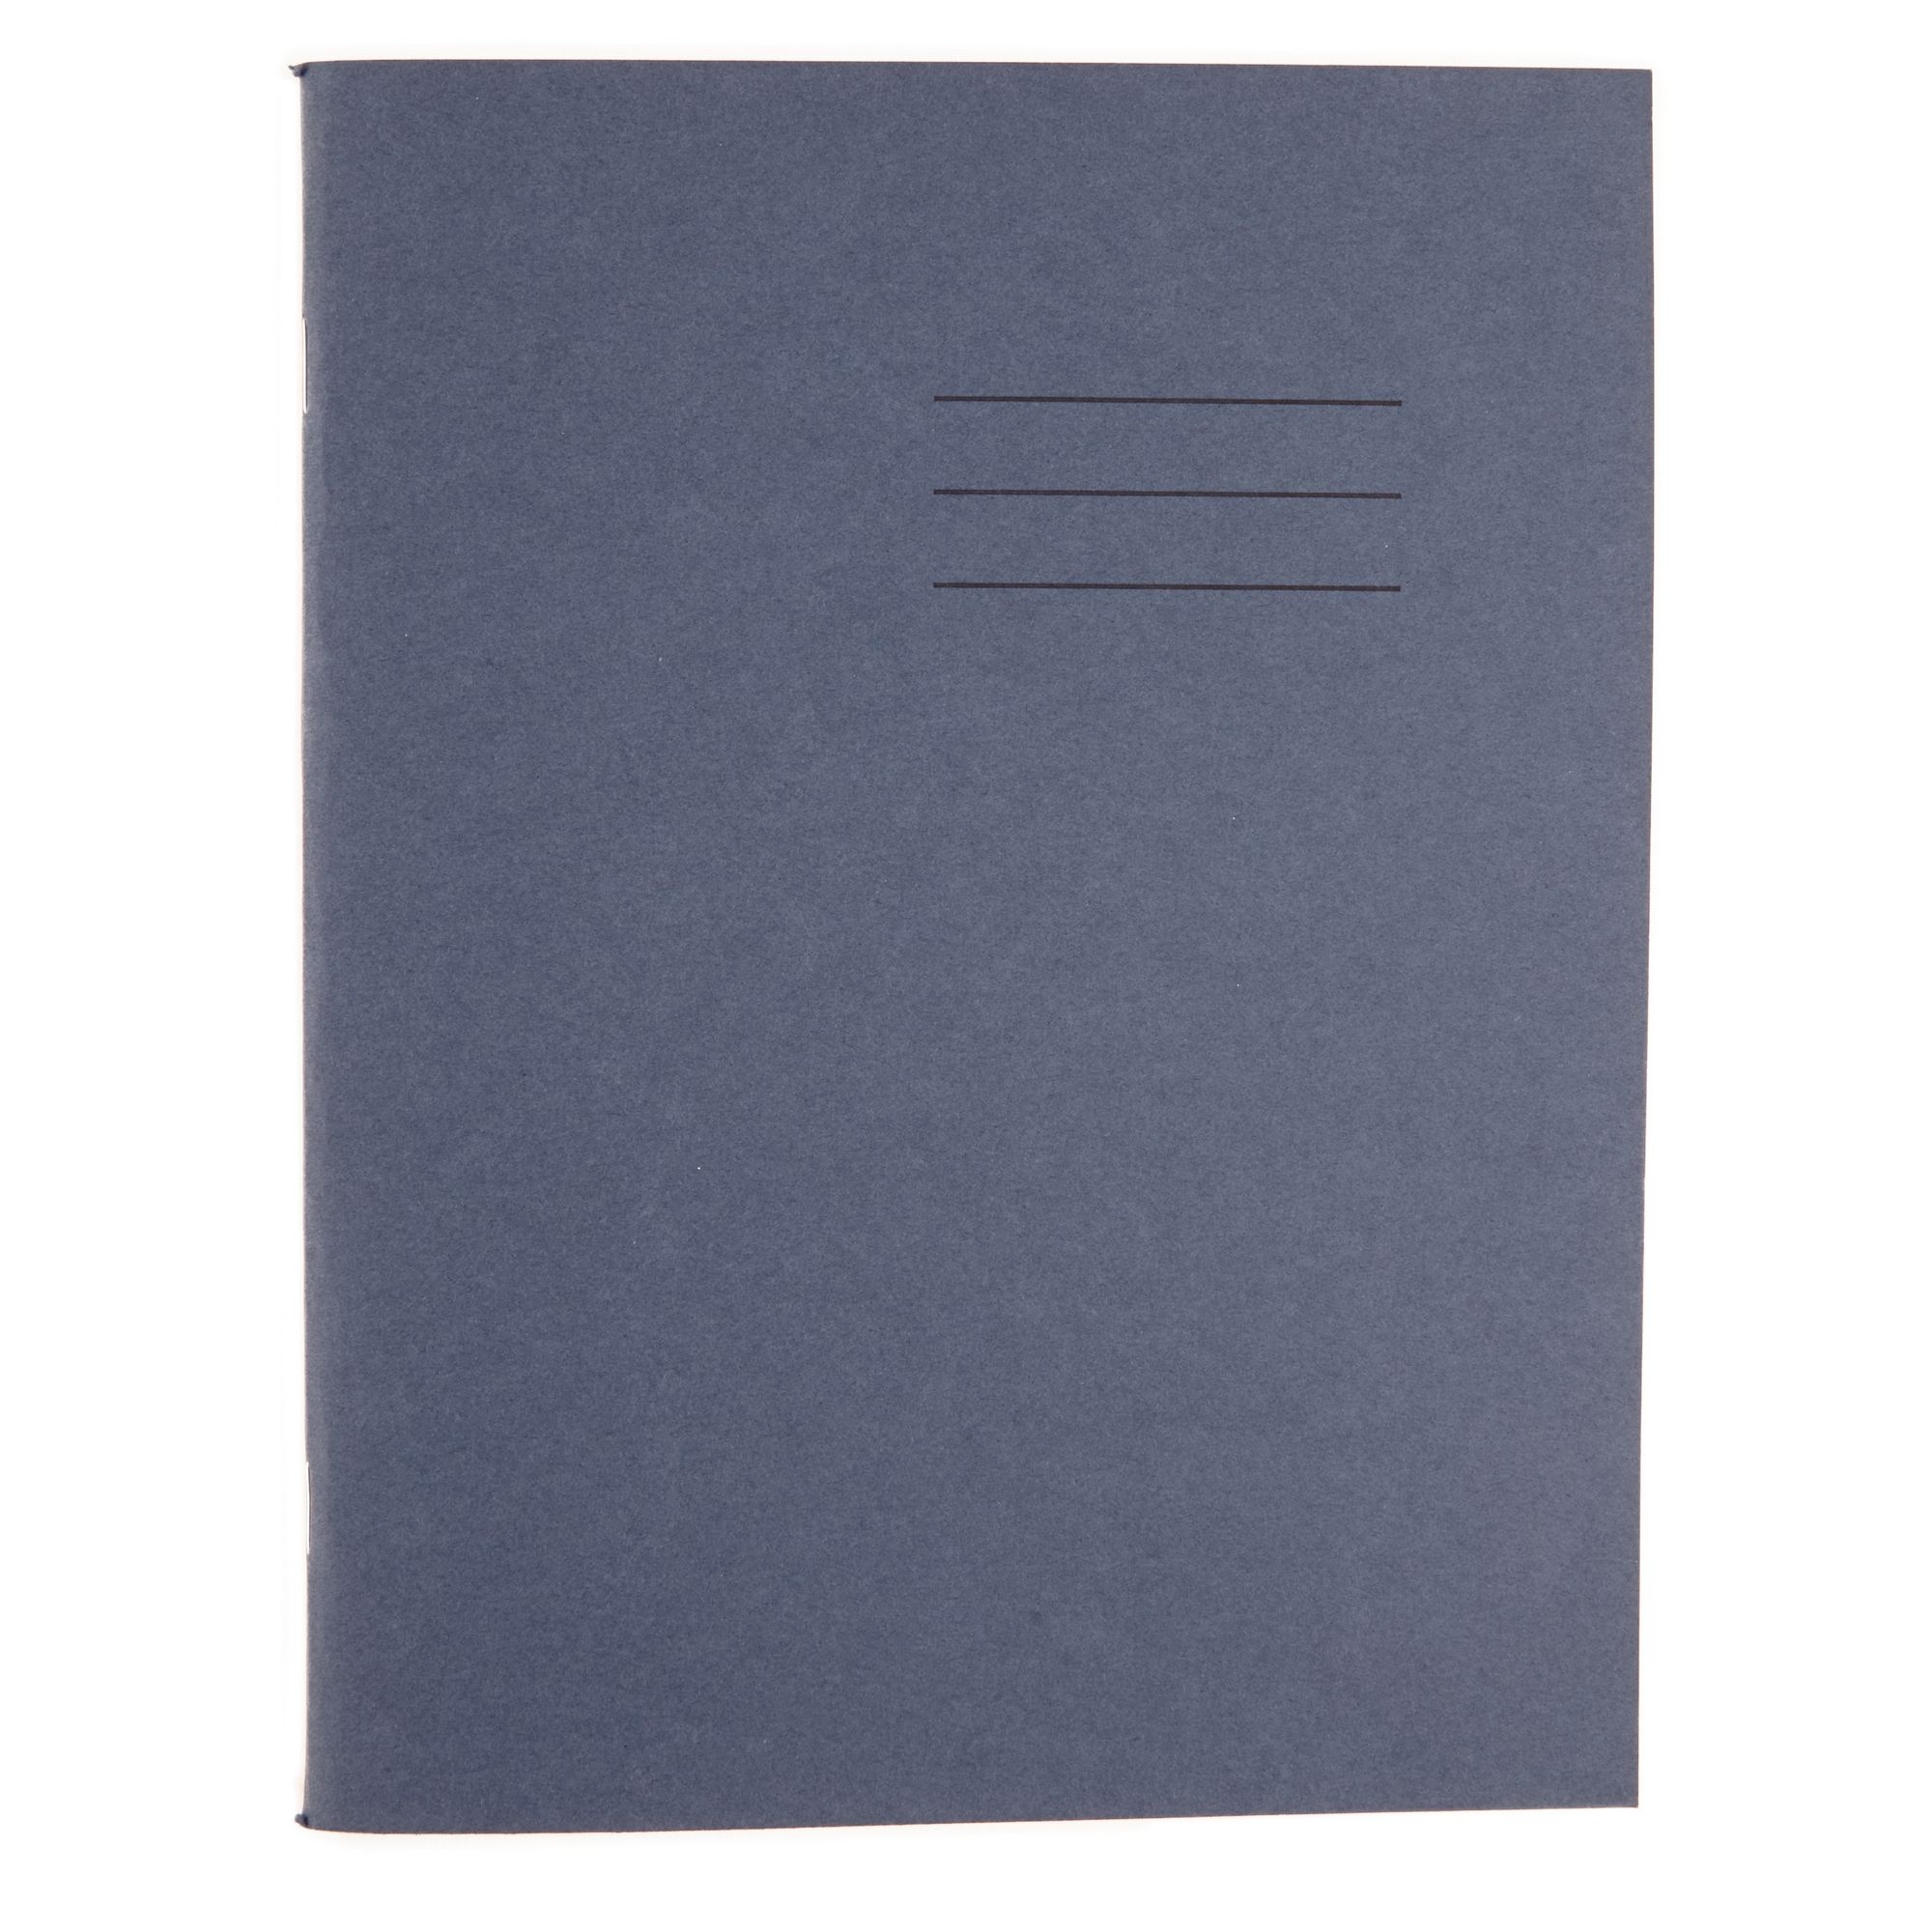 Classmates Blue A4 32 page Top Half Plain/Bottom Half 13mm Ruled Exercise Book - Pack of 100